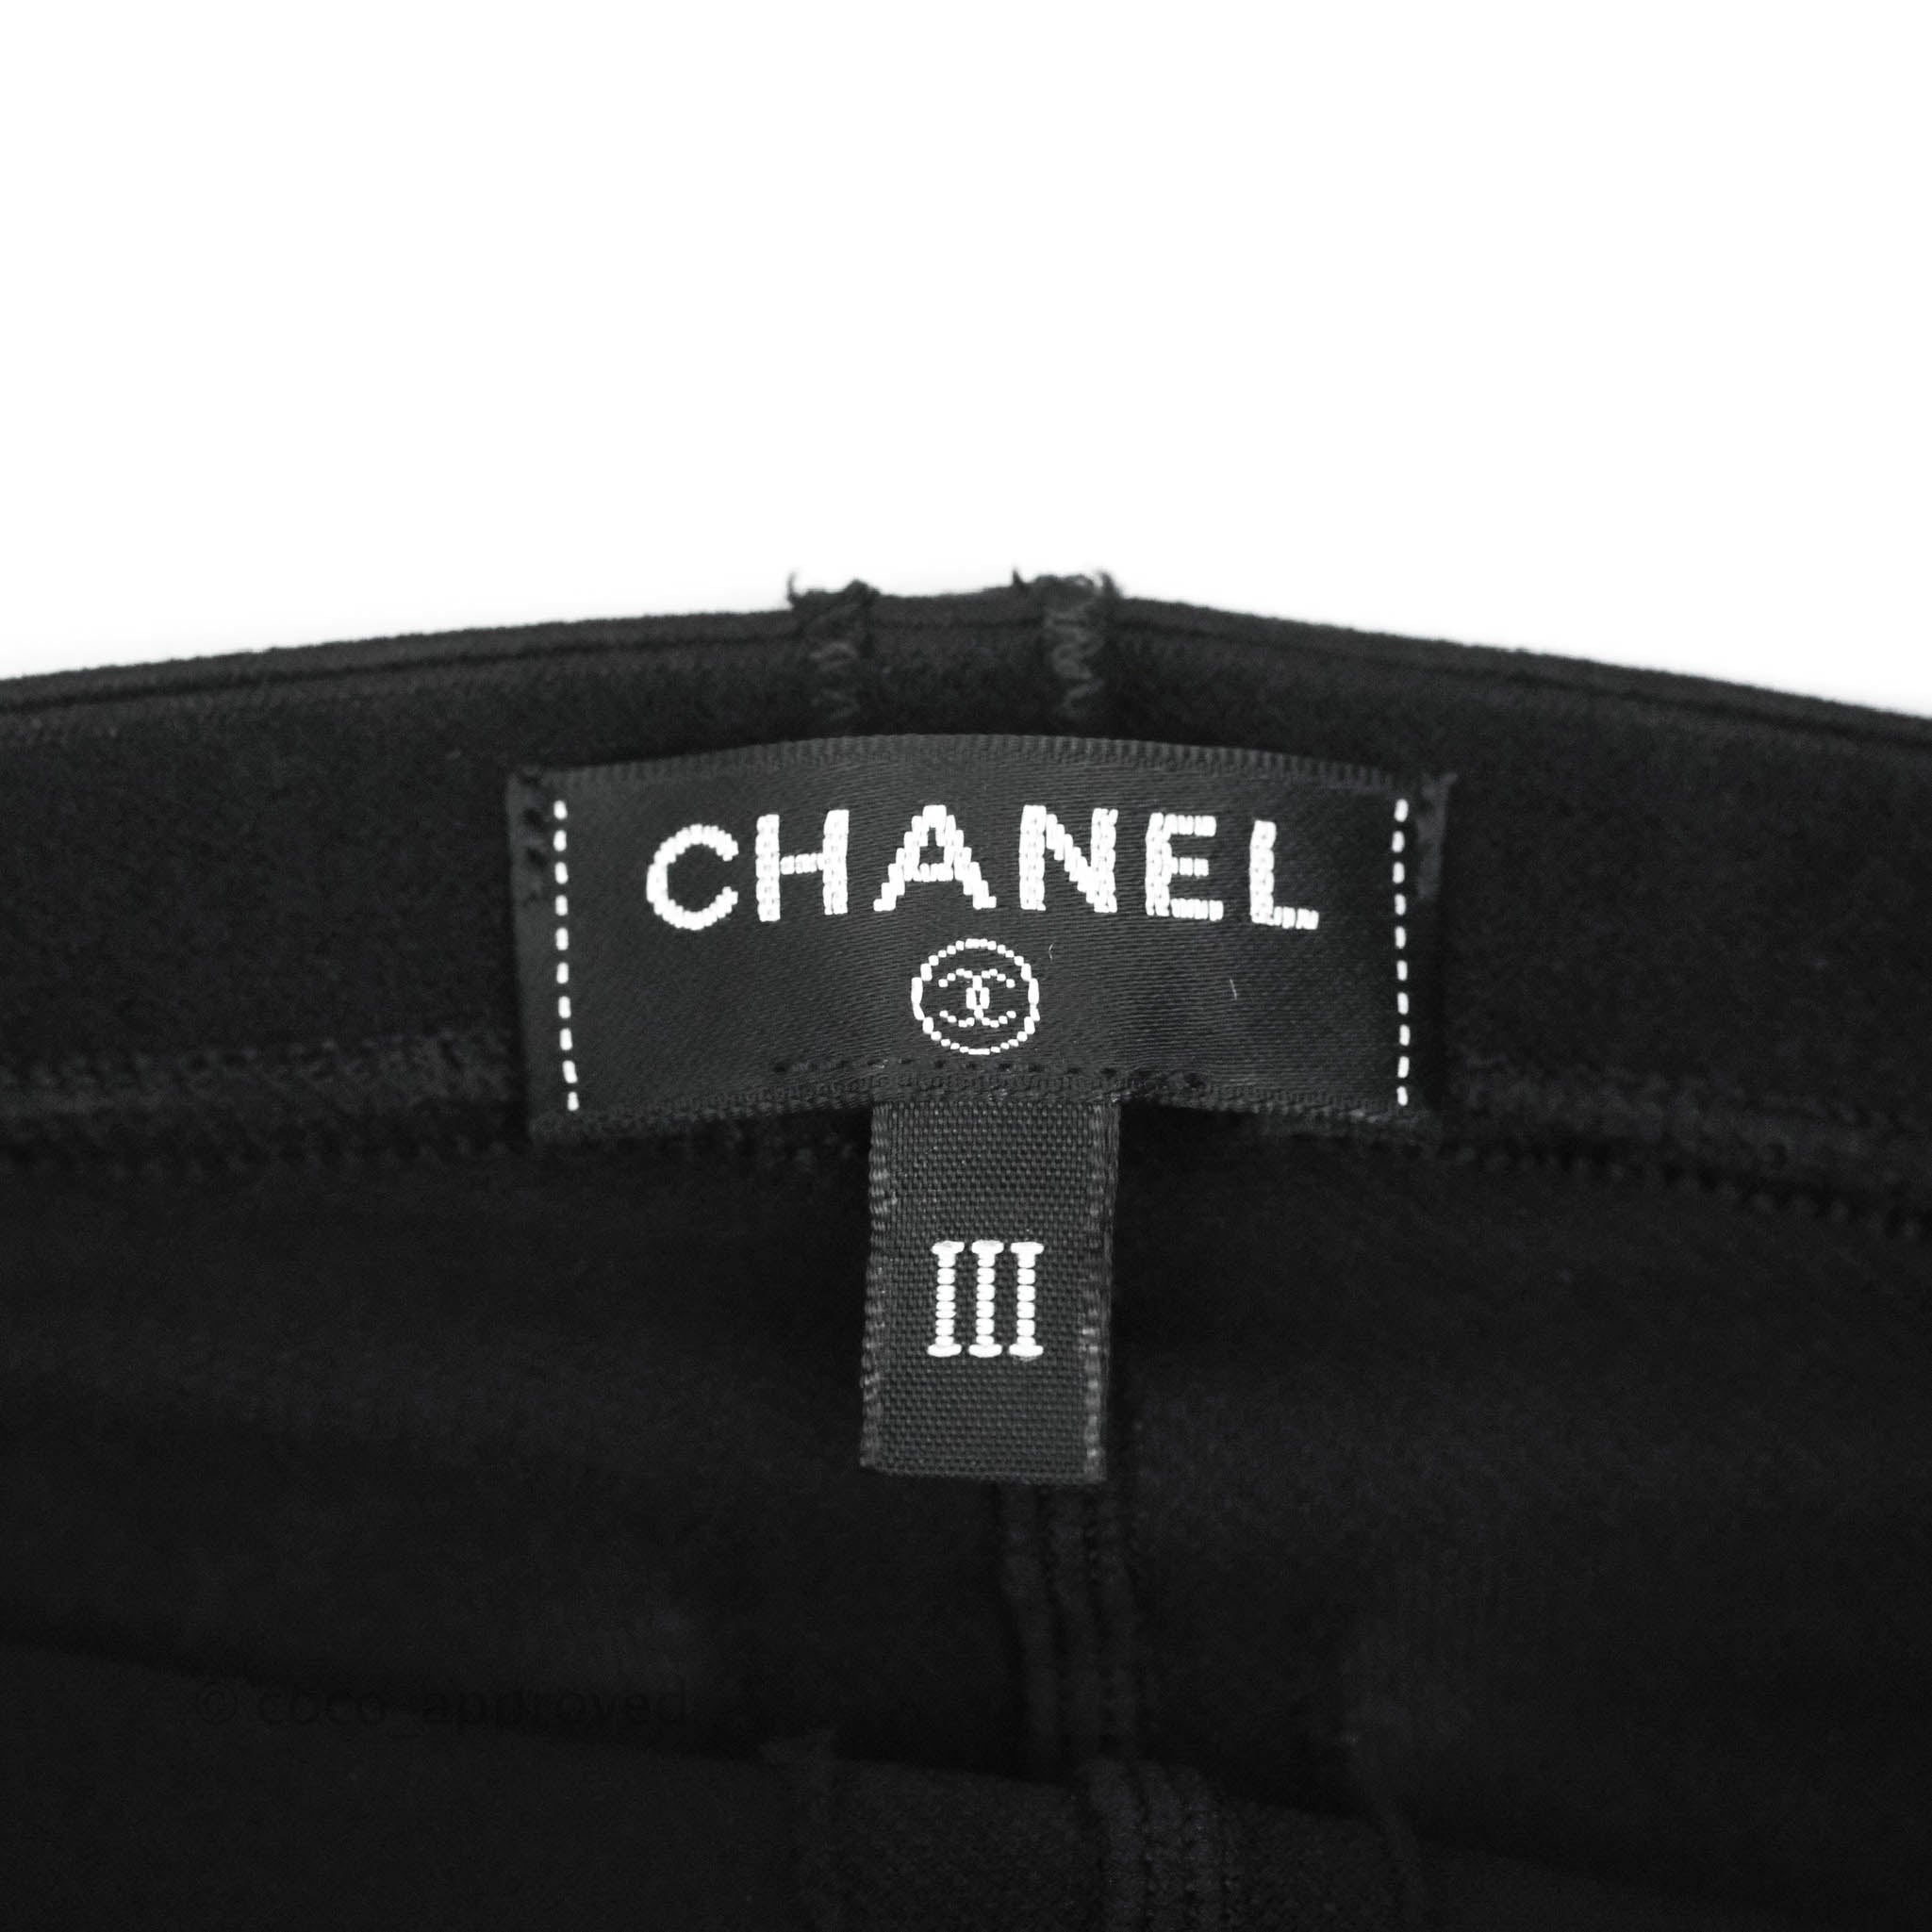 CHANEL, Accessories, New Chanel Black Cc Coco Sheer Leggings Pantyhose